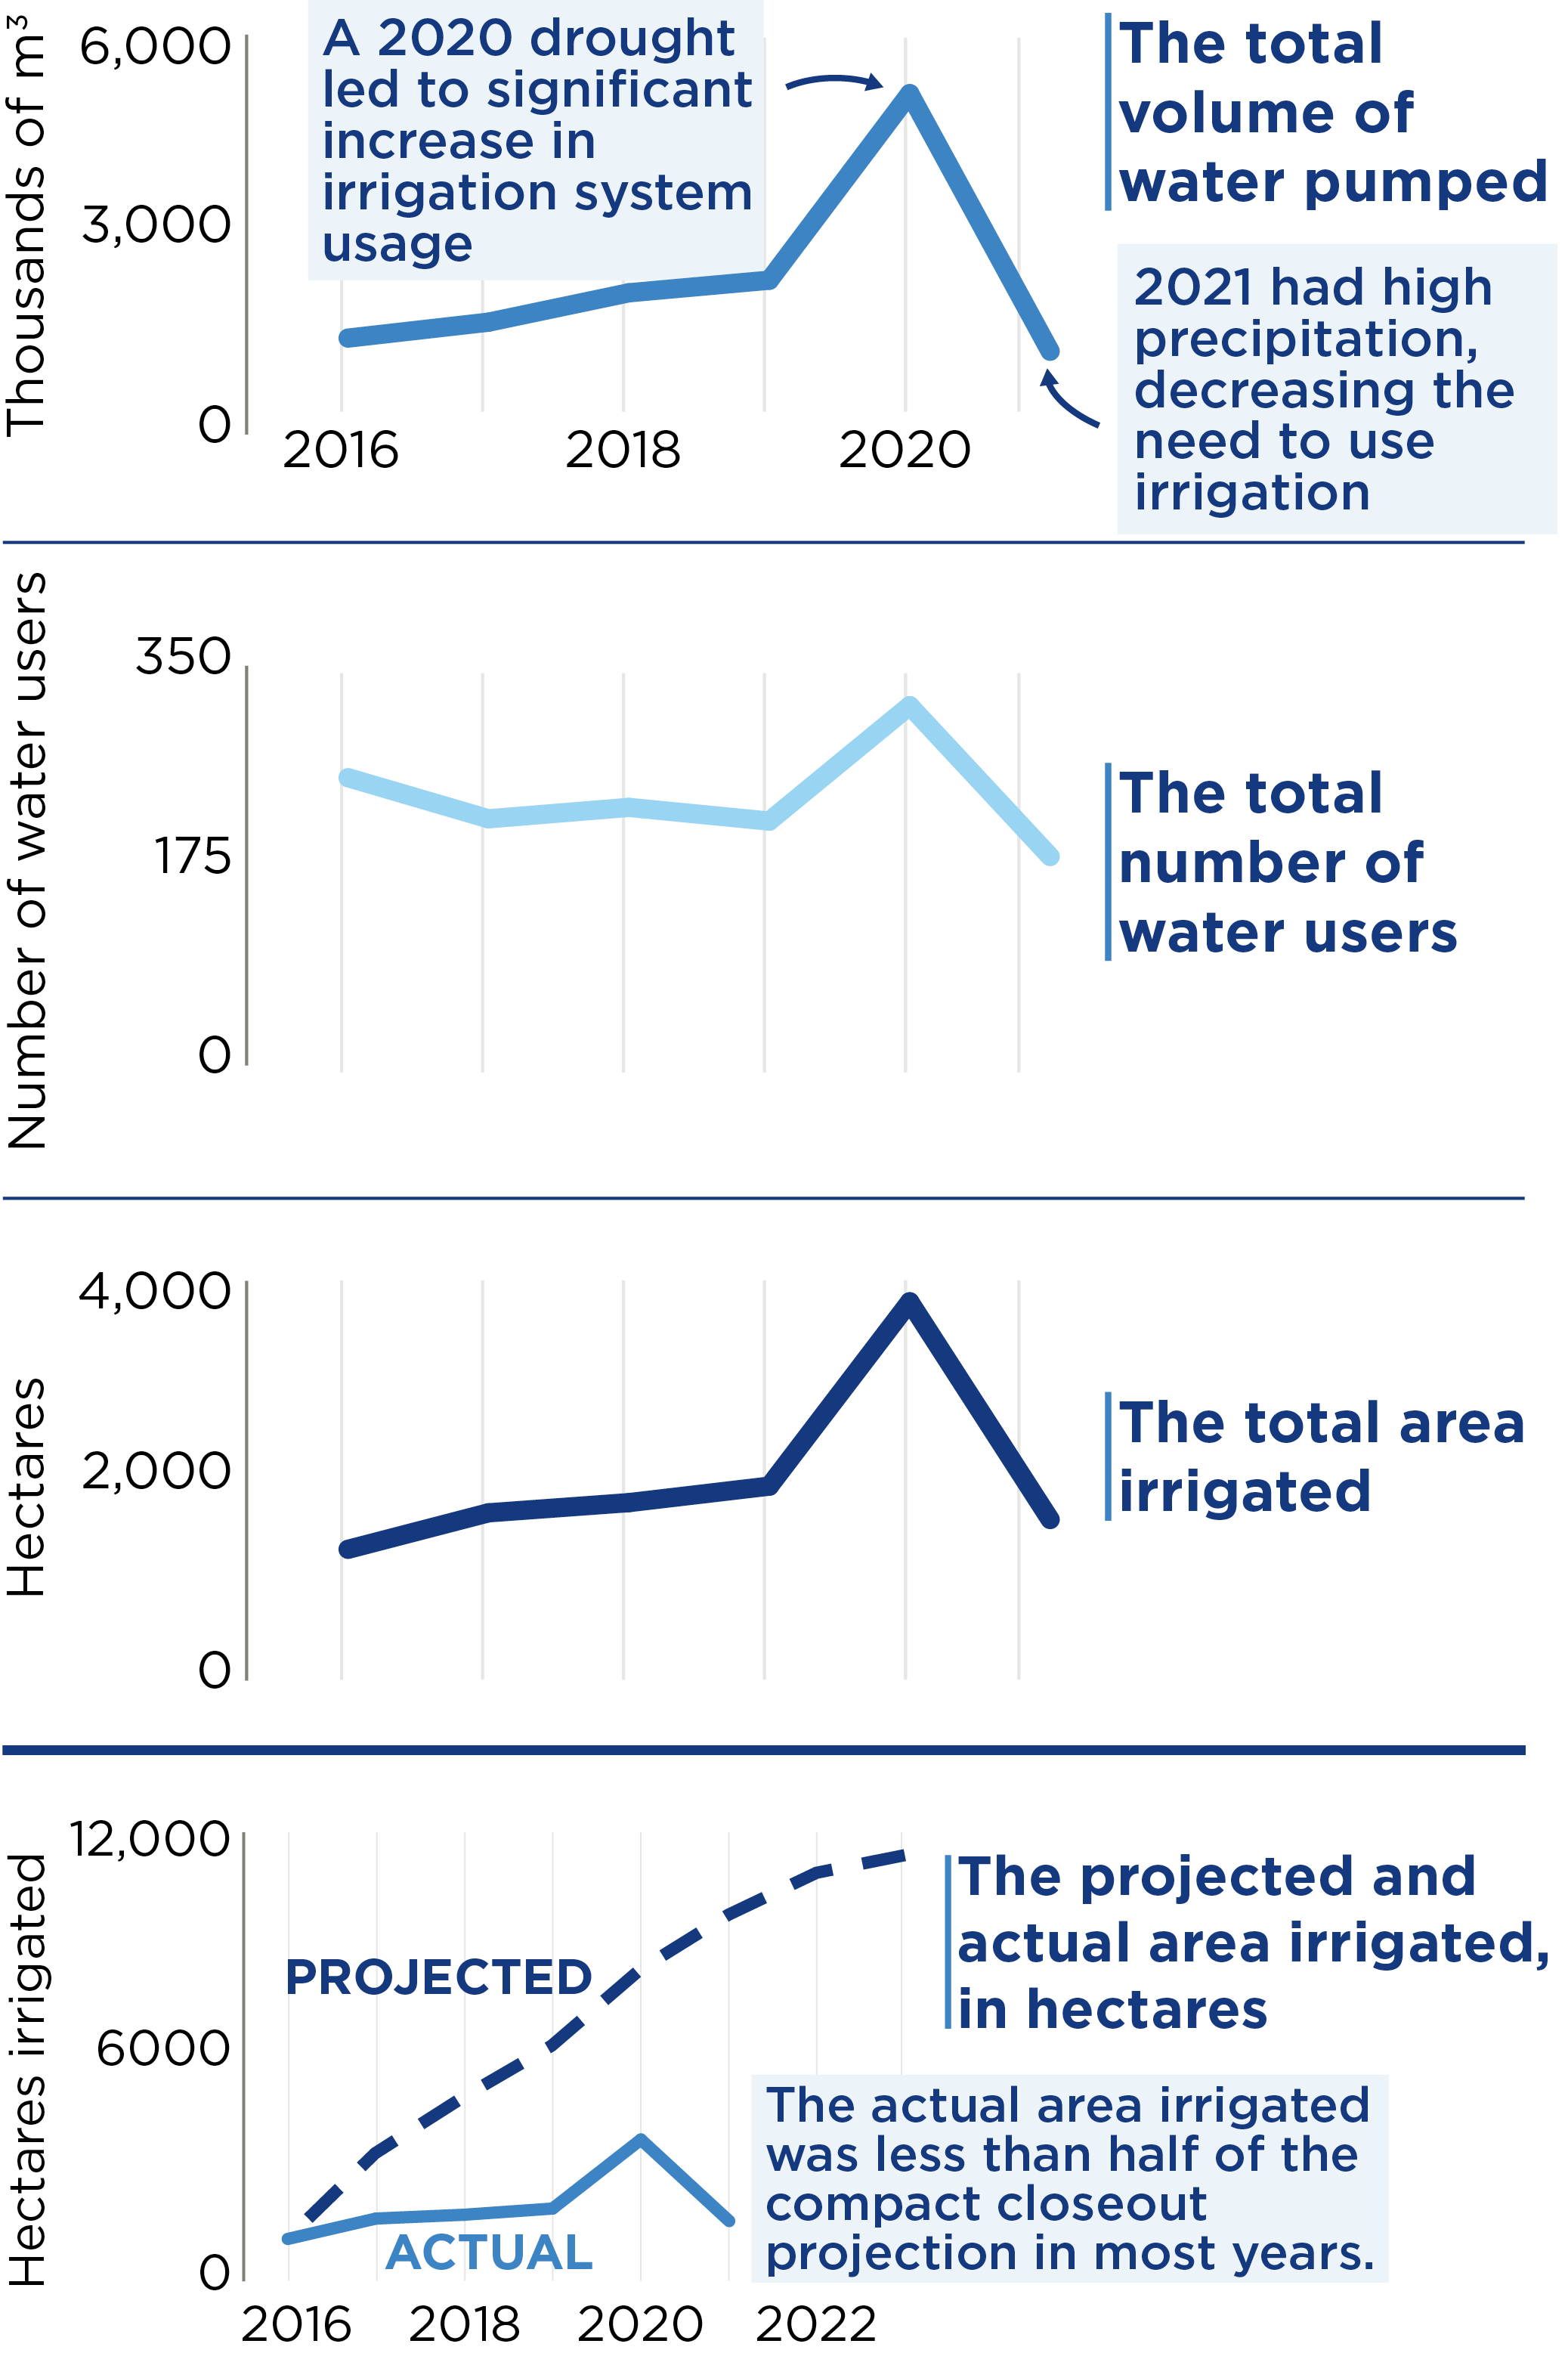 Four graphs show: The total volume of water pumped, the total number of water users, the total area irrigated and the projected and actual area irrigated in hectares. In all cases, a 2020 drought resulted in significantly elevated irrigation usage, water users and irrigated areas. In 2021, a rainy season led to a drop at or below the overall trend. The actual area irrigated was less than half of the compact closeout projection in most years.